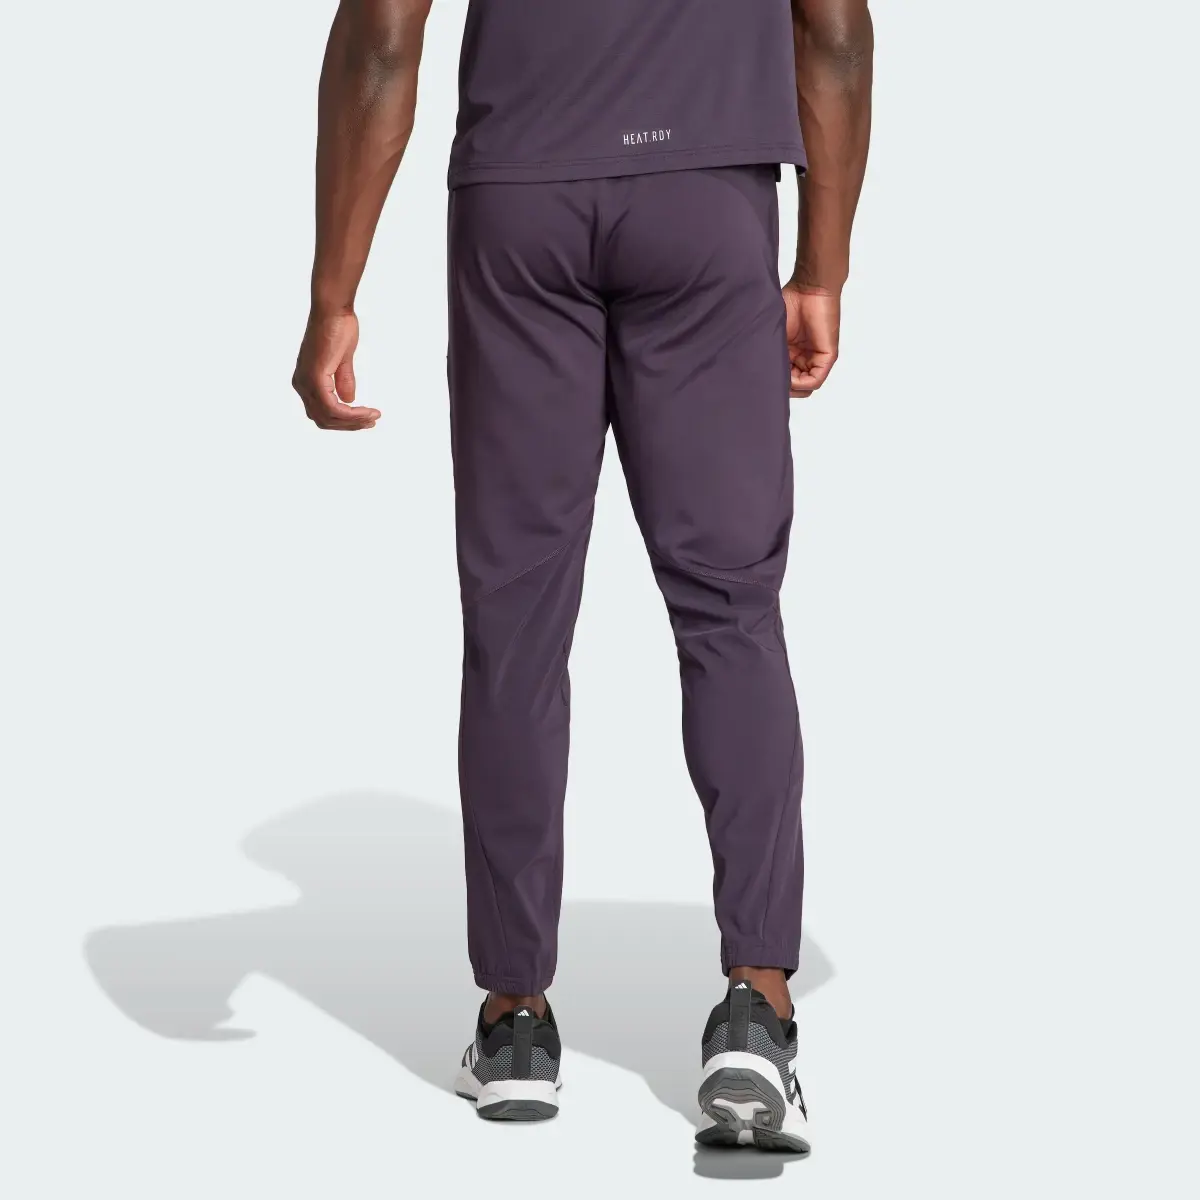 Adidas Designed for Training Workout Pants. 2